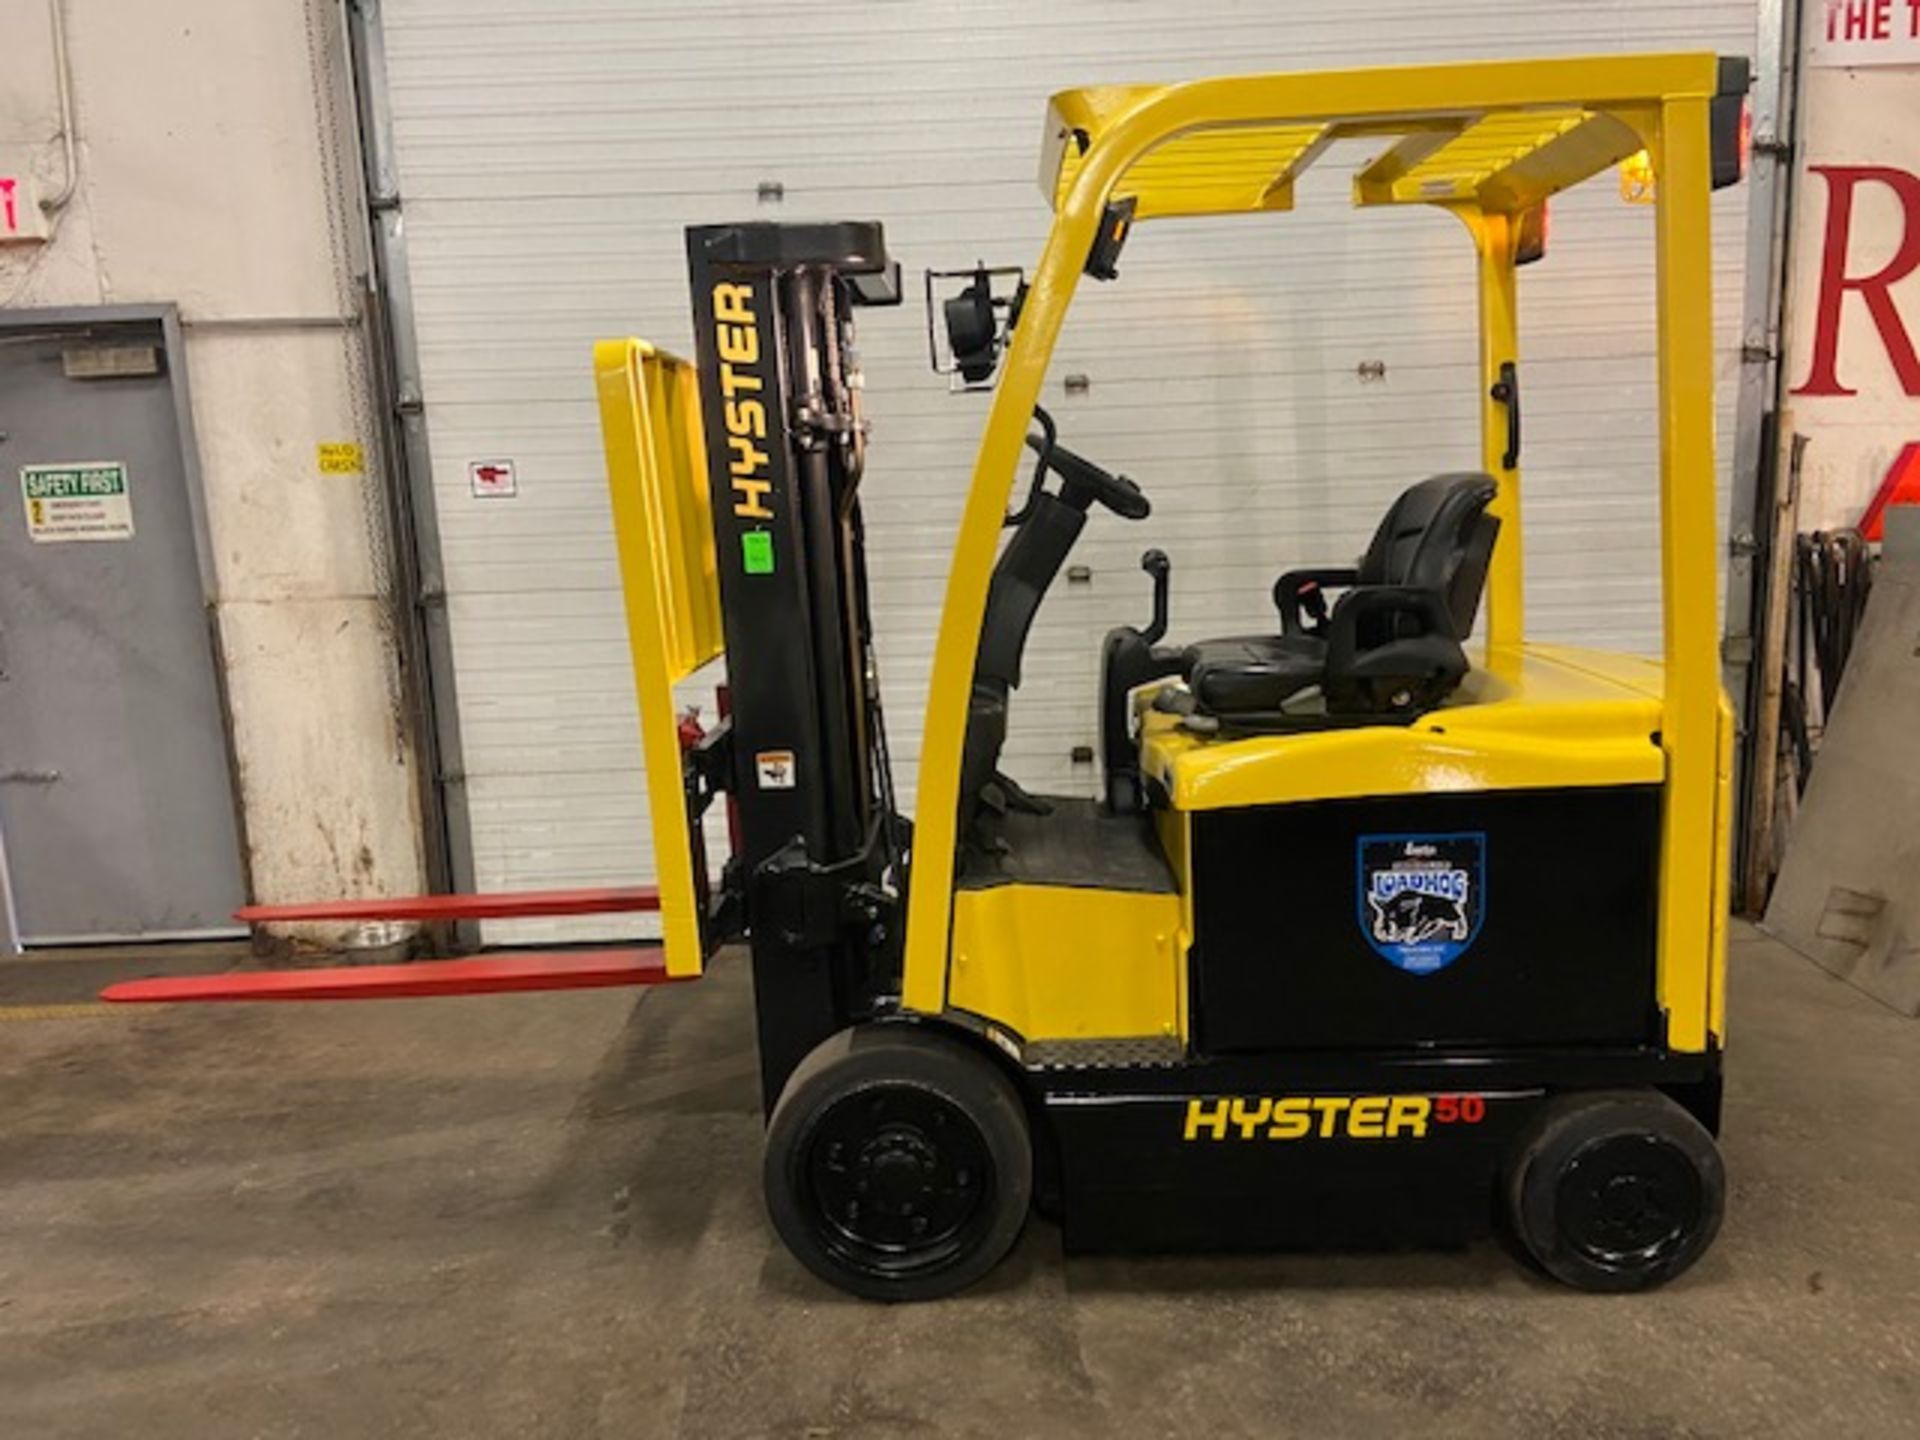 FREE CUSTOMS - 2013 Hyster 5000lbs Capacity Forklift Electric with 3-STAGE MAST sideshift MINT